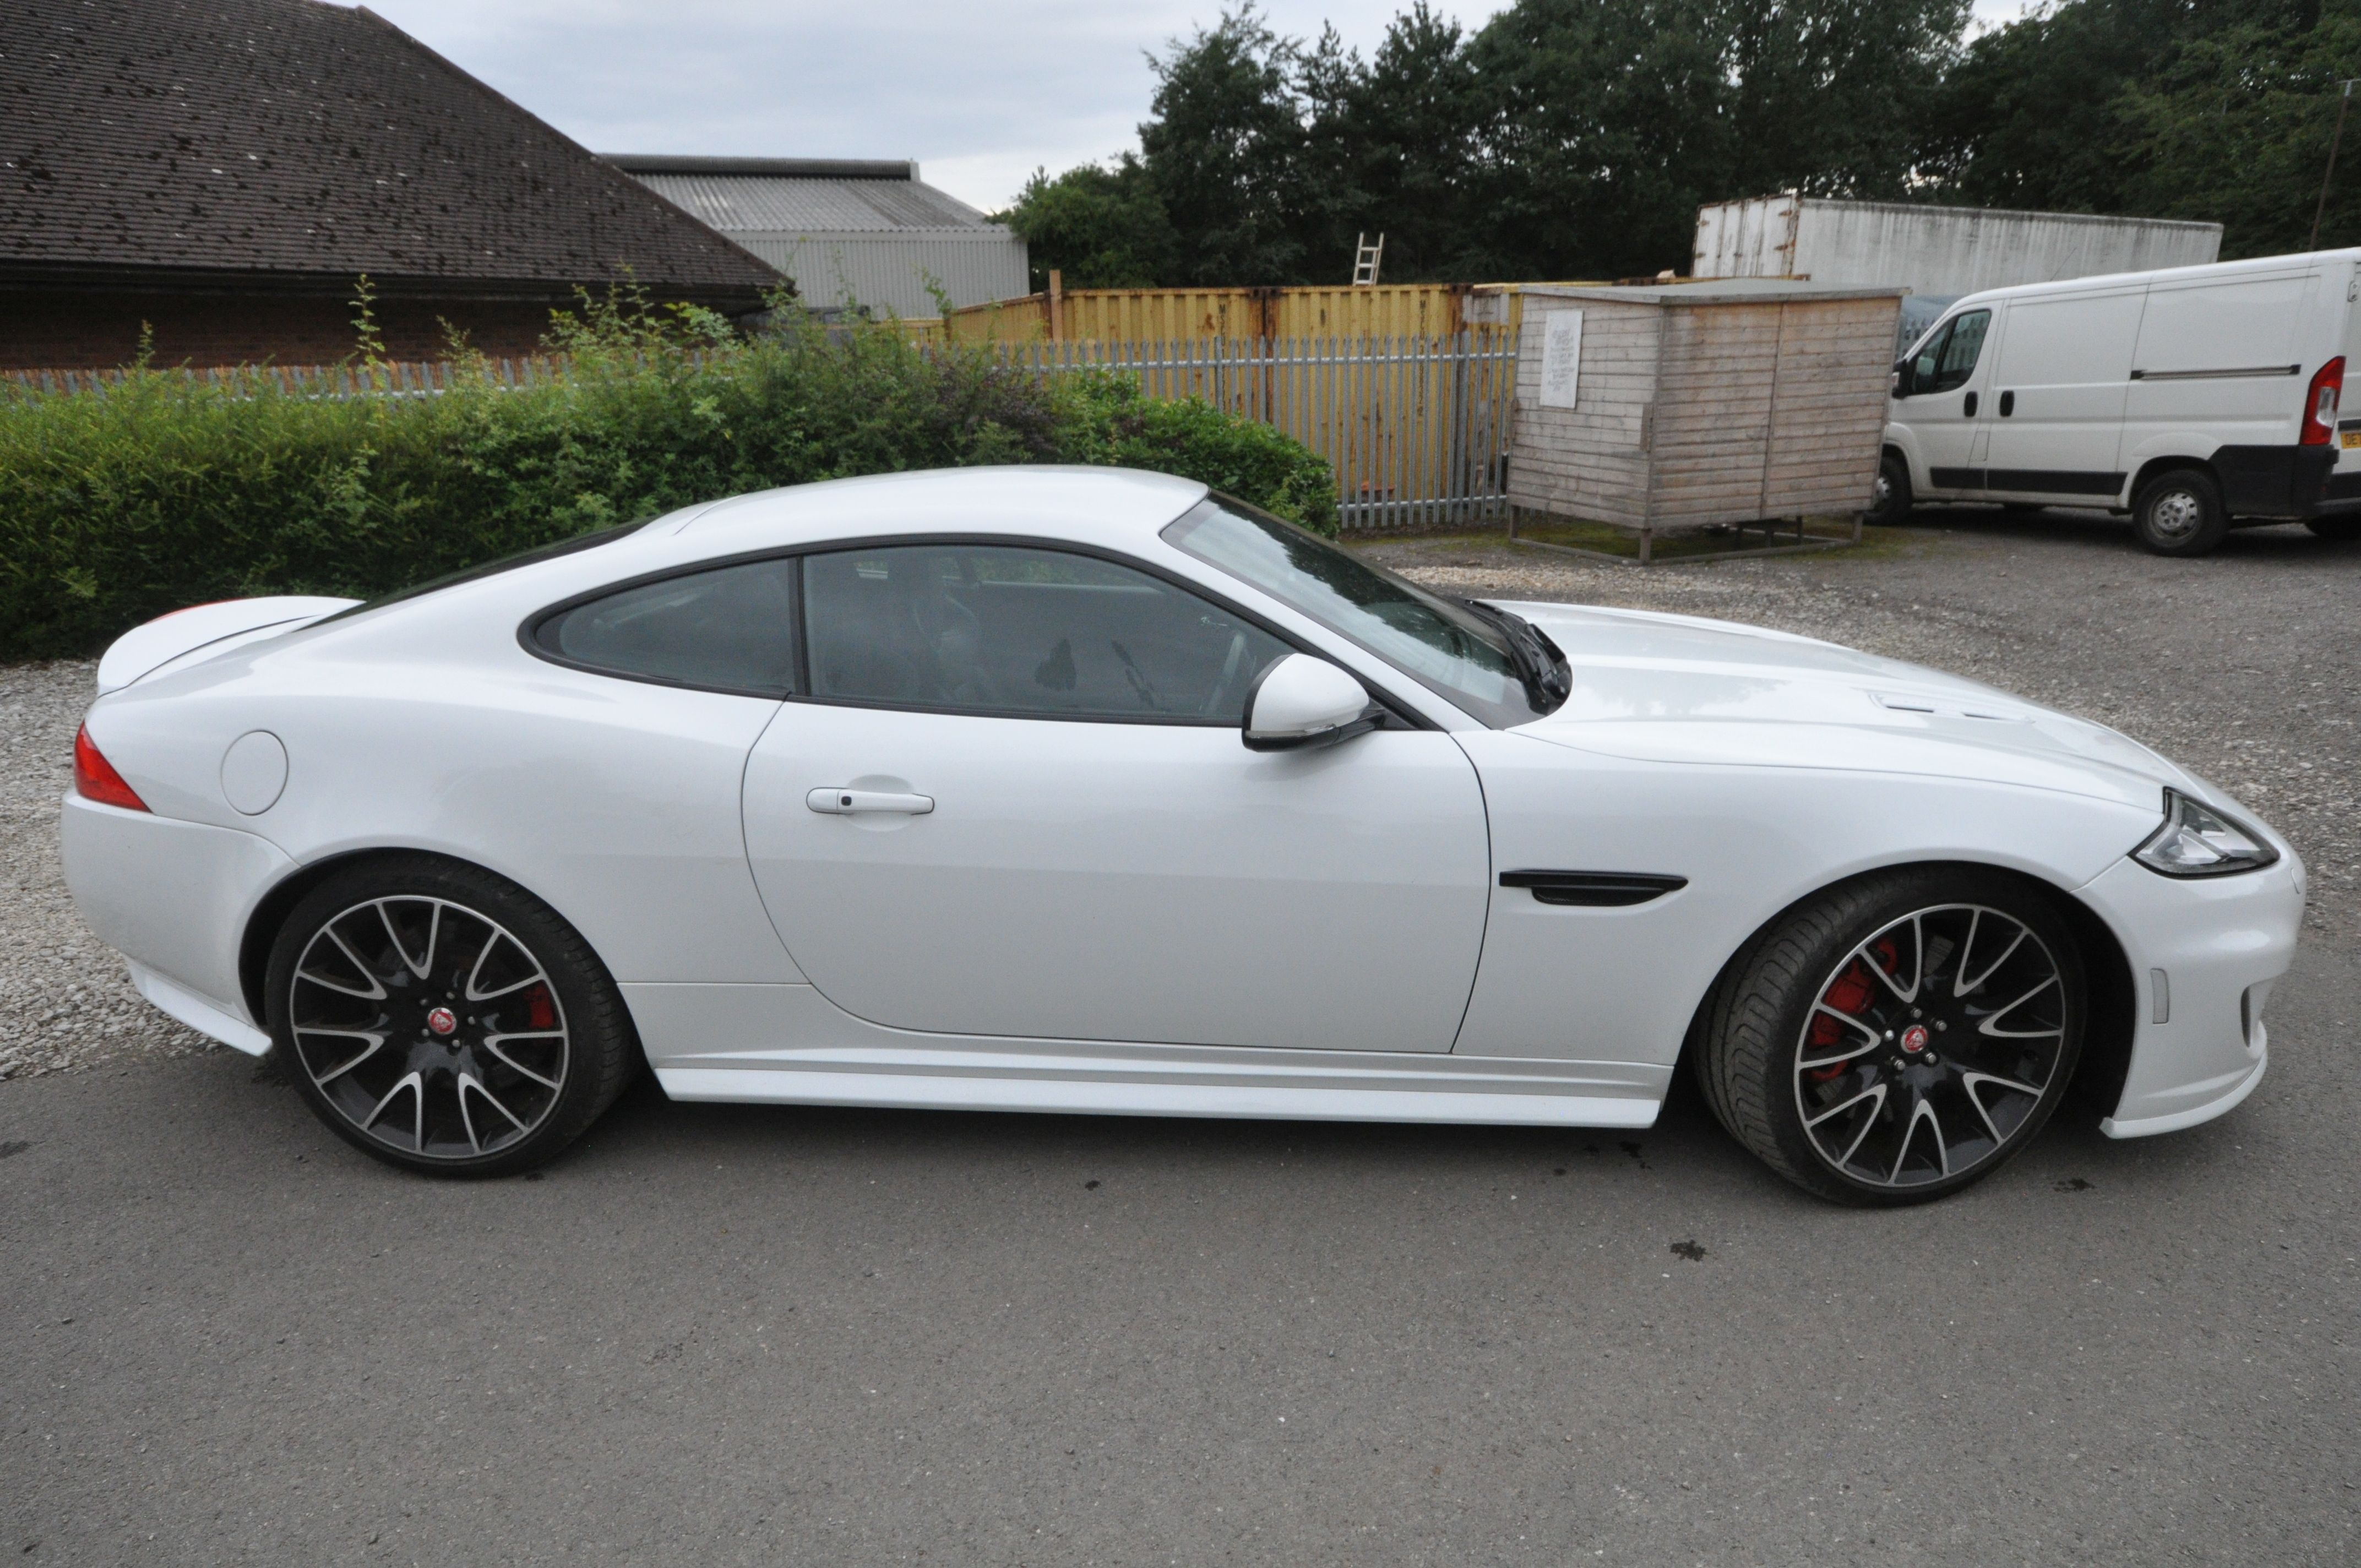 A 2014 JAGUAR XK DYNAMIC R AUTO COUPE - OW14 DUV - This vehicle was first registered in July 2014. A - Image 3 of 11